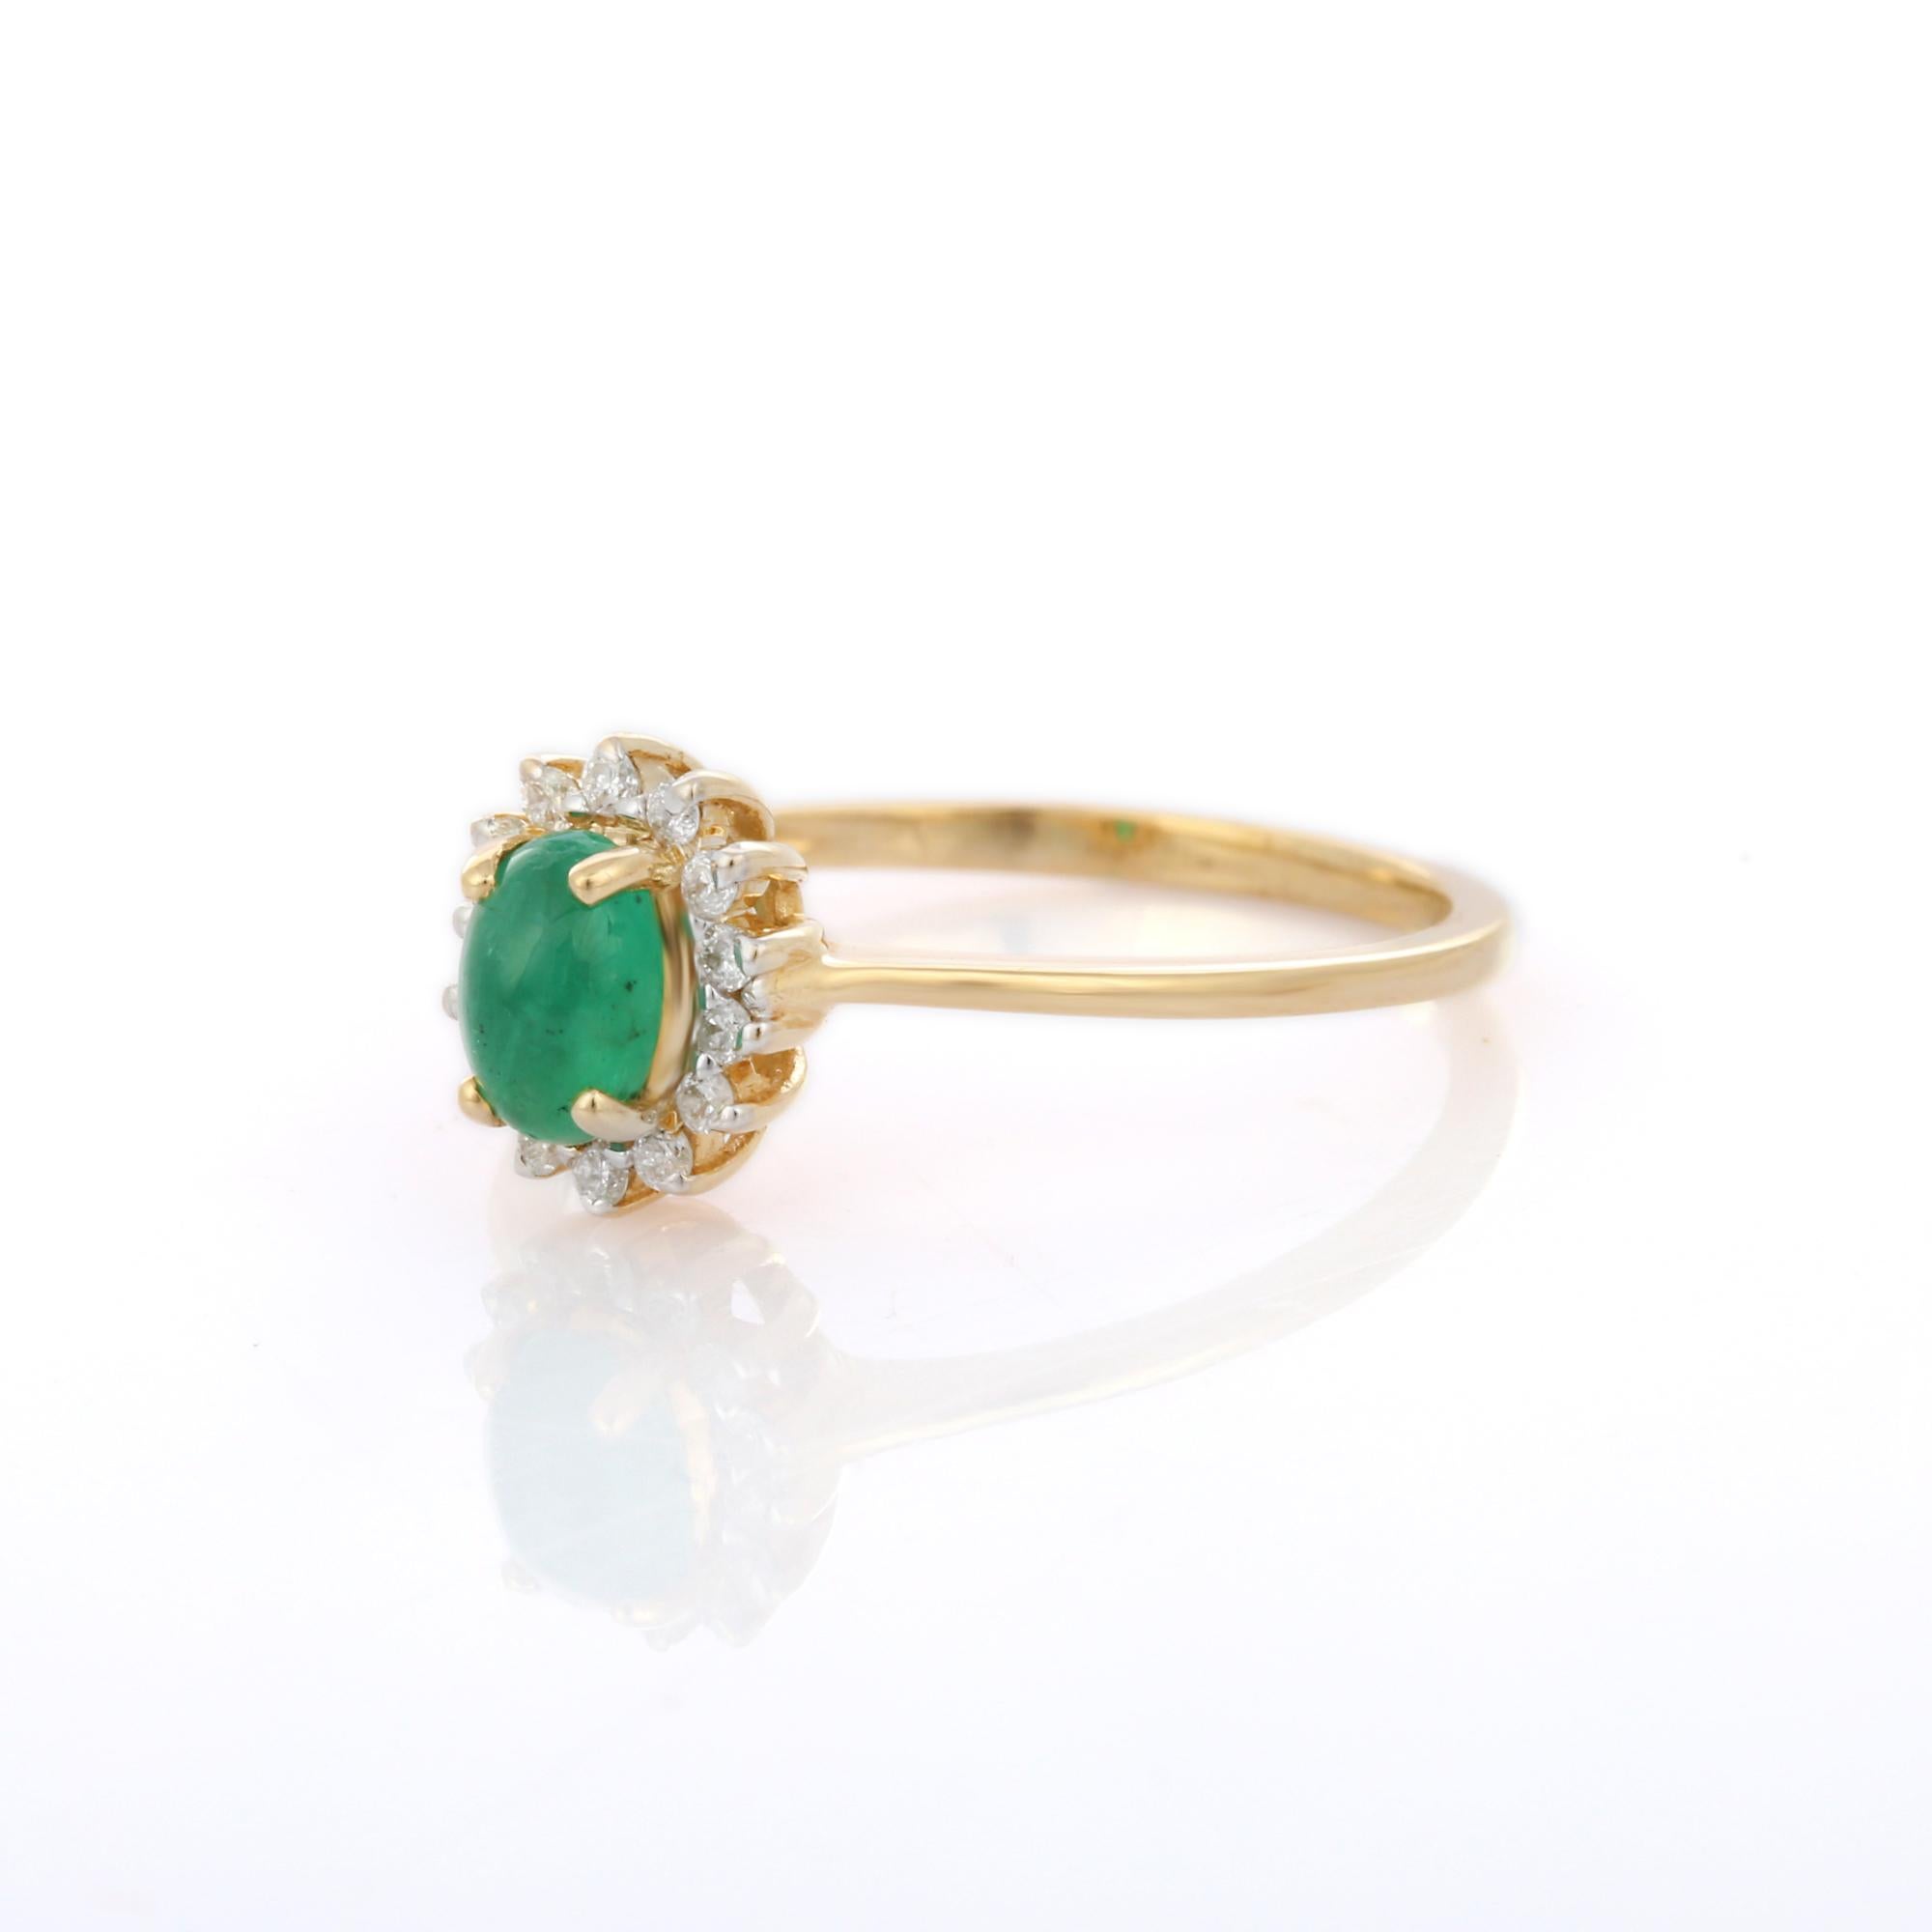 For Sale:  14K Yellow Gold Ring with Oval Cut Emerald and Diamonds, Emerald Halo Ring 4